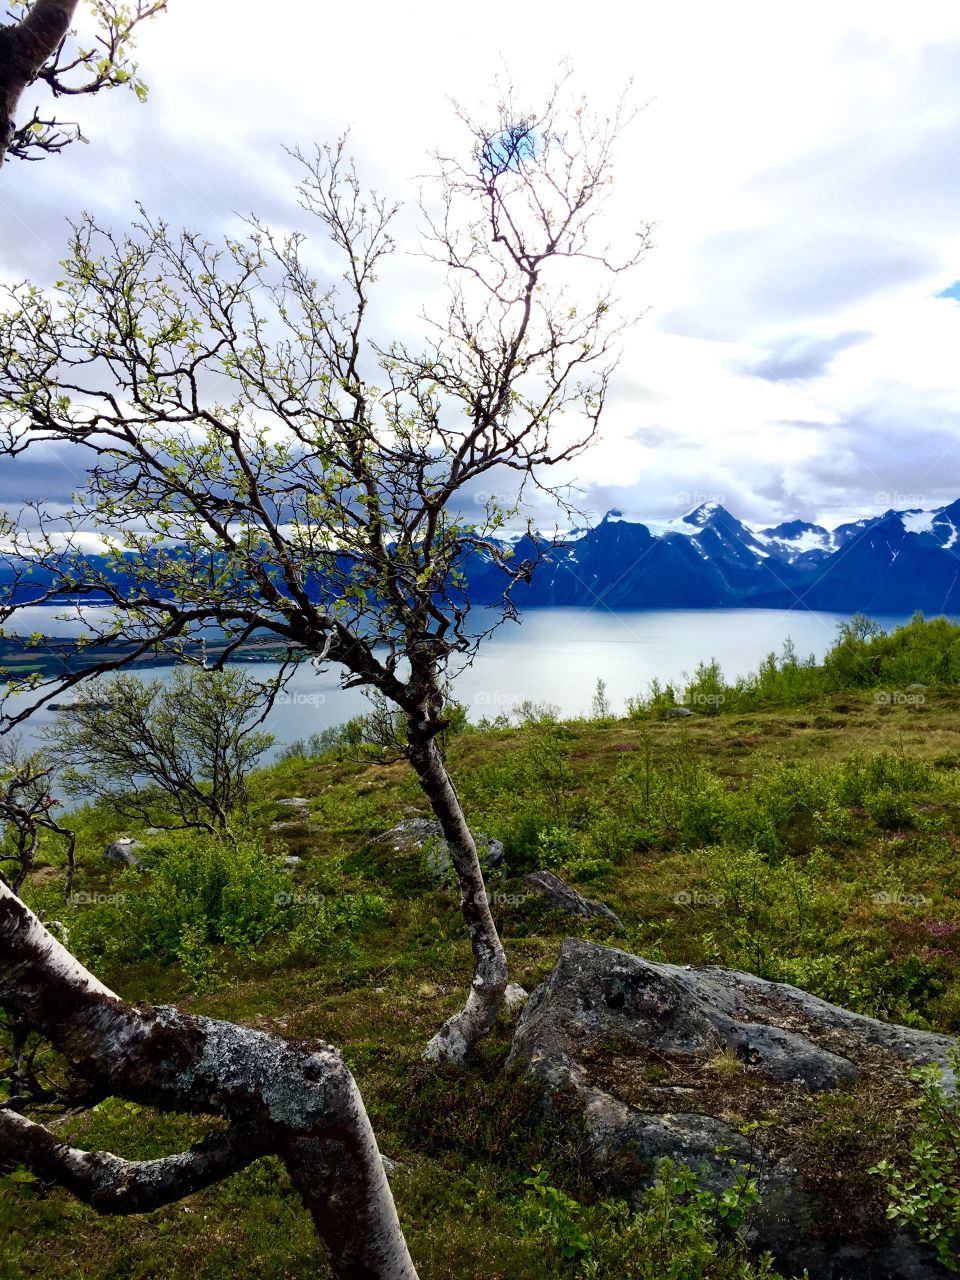 Norwegian fjord . Out hiking in beautiful Lyngen. Not many trees this high up. 